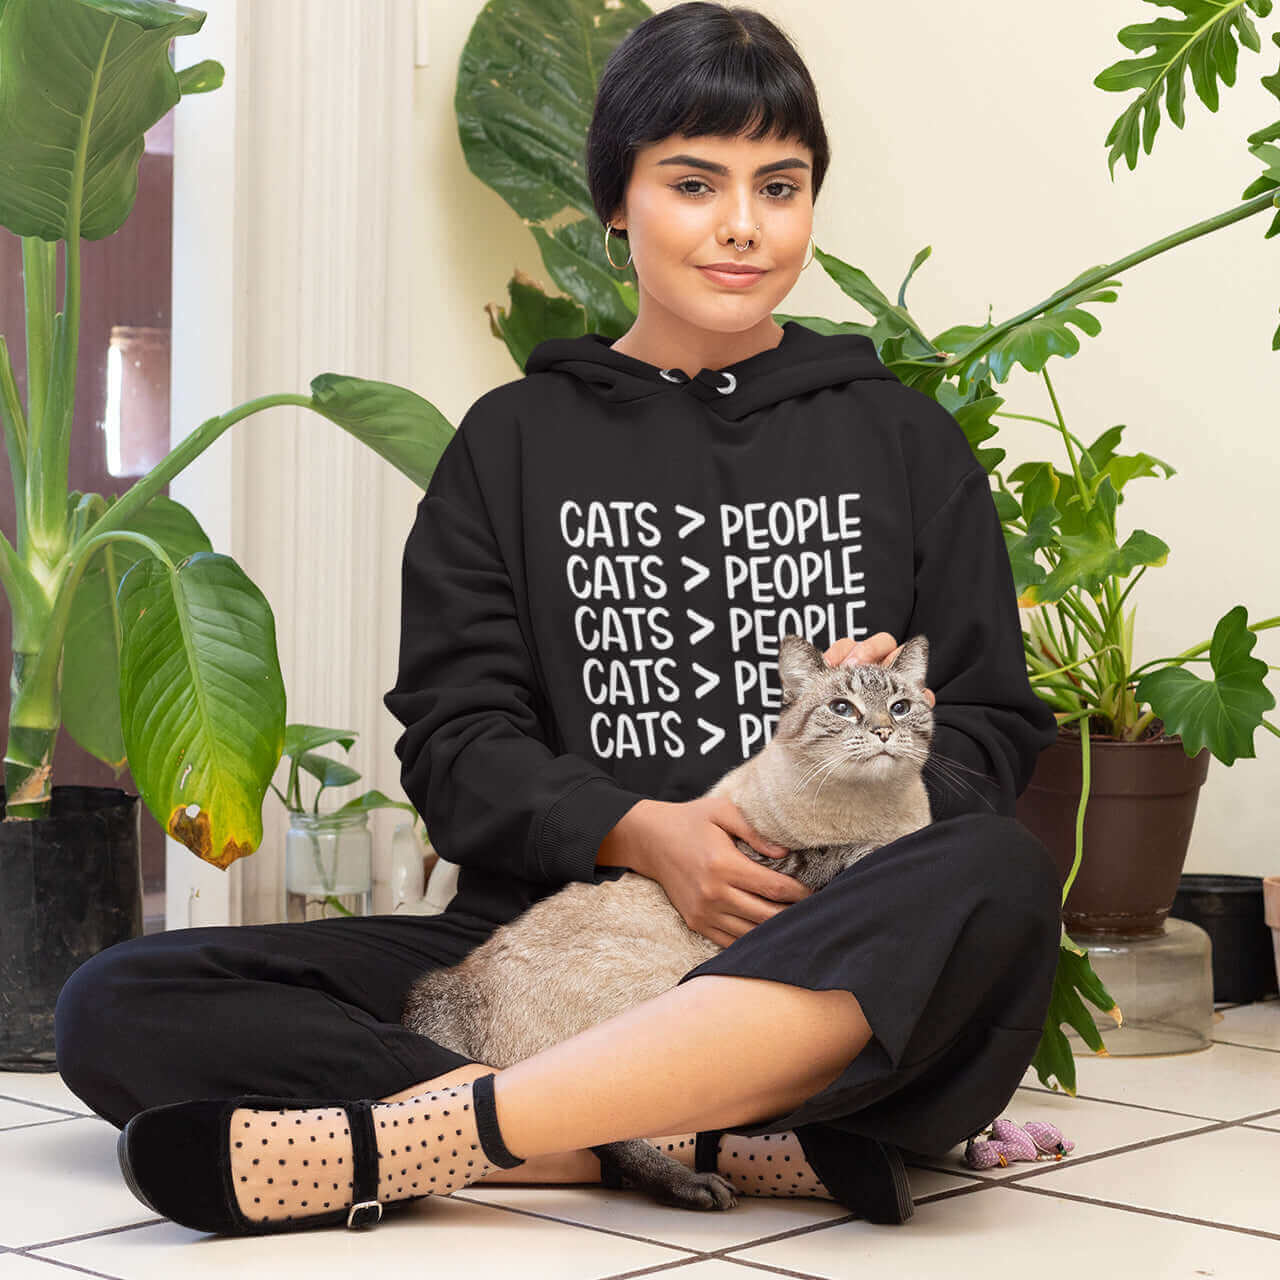 Cats > people. Cats are greater than people hooded sweatshirt hoodie